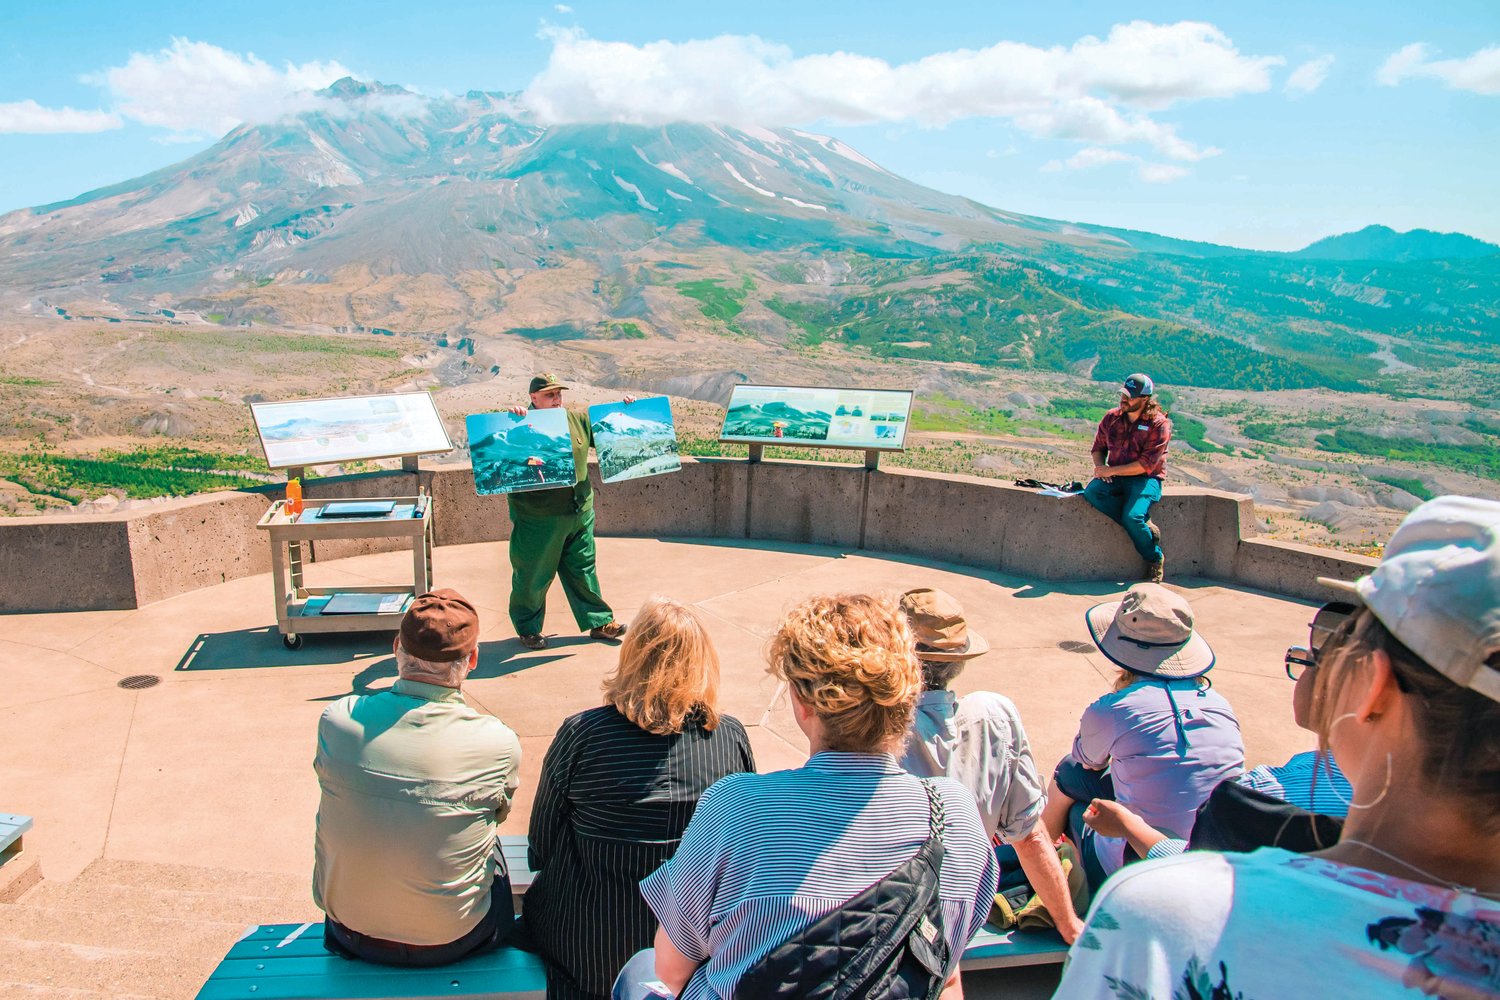 Katie Akers talks about the eruption of Mount St. Helens with Gov. Jay Inslee and Bill Nye in attendance at an outdoor auditorium Thursday at the Johnston Ridge Observatoy.